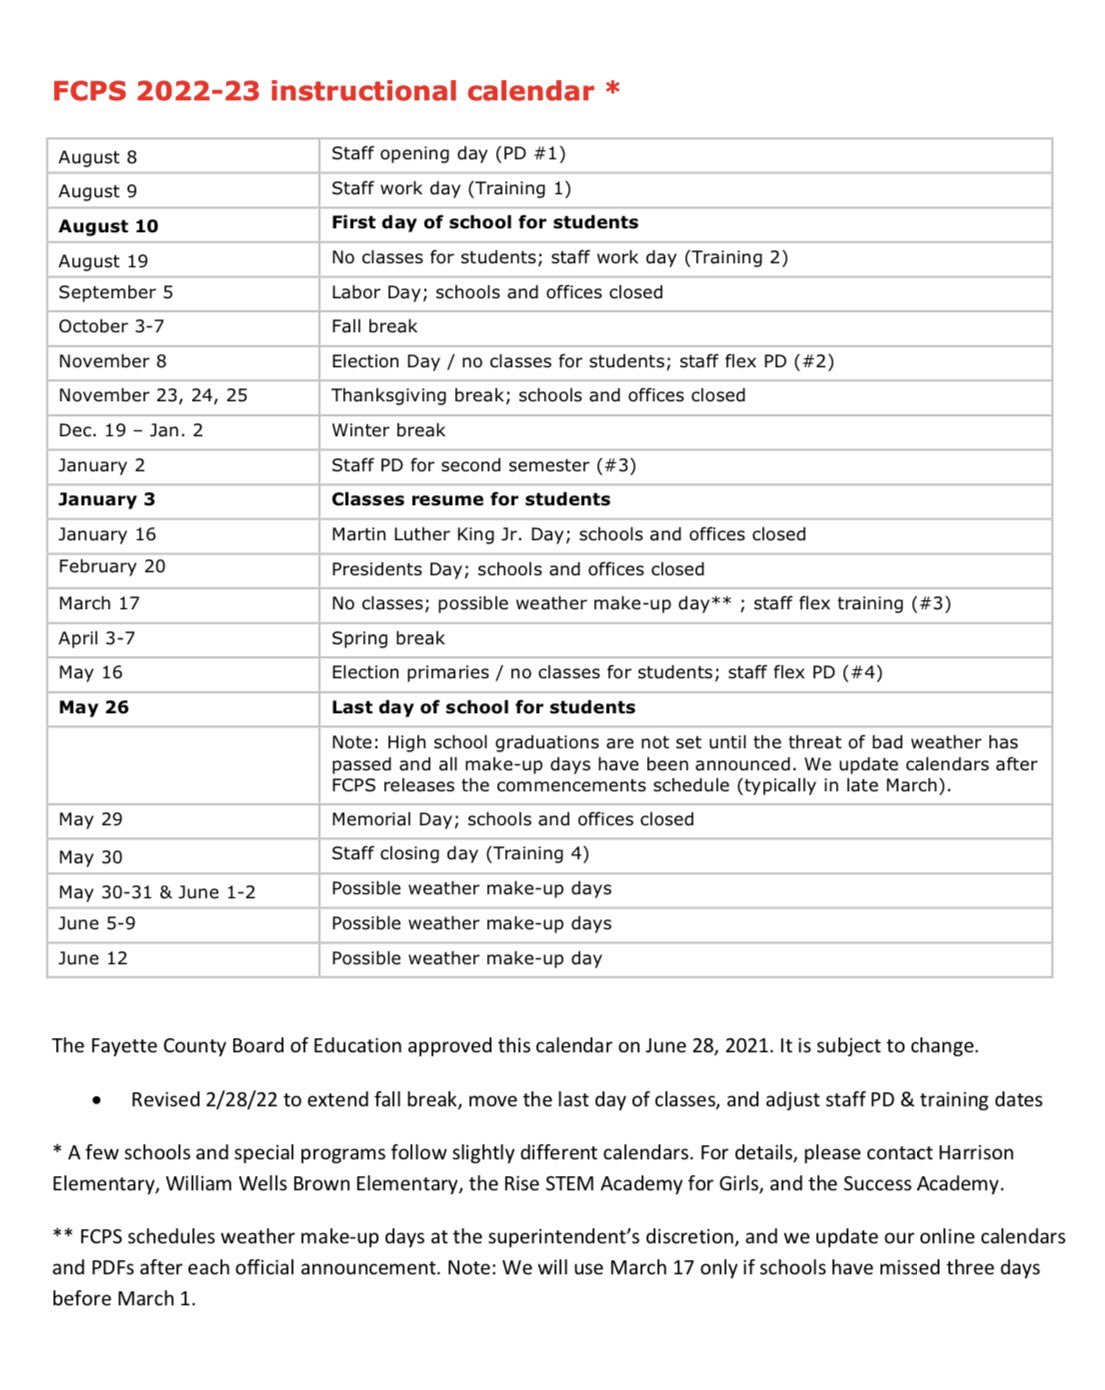 Fcps Calendar 2022 2023 Tyler Murphy On Twitter: "Tonight, Our Board Unanimously Approved An  Amended Version Of The 2022-2023 Instructional Calendar That Would Include  A Week-Long Fall Break From October 3 To 7, 2022, And Move